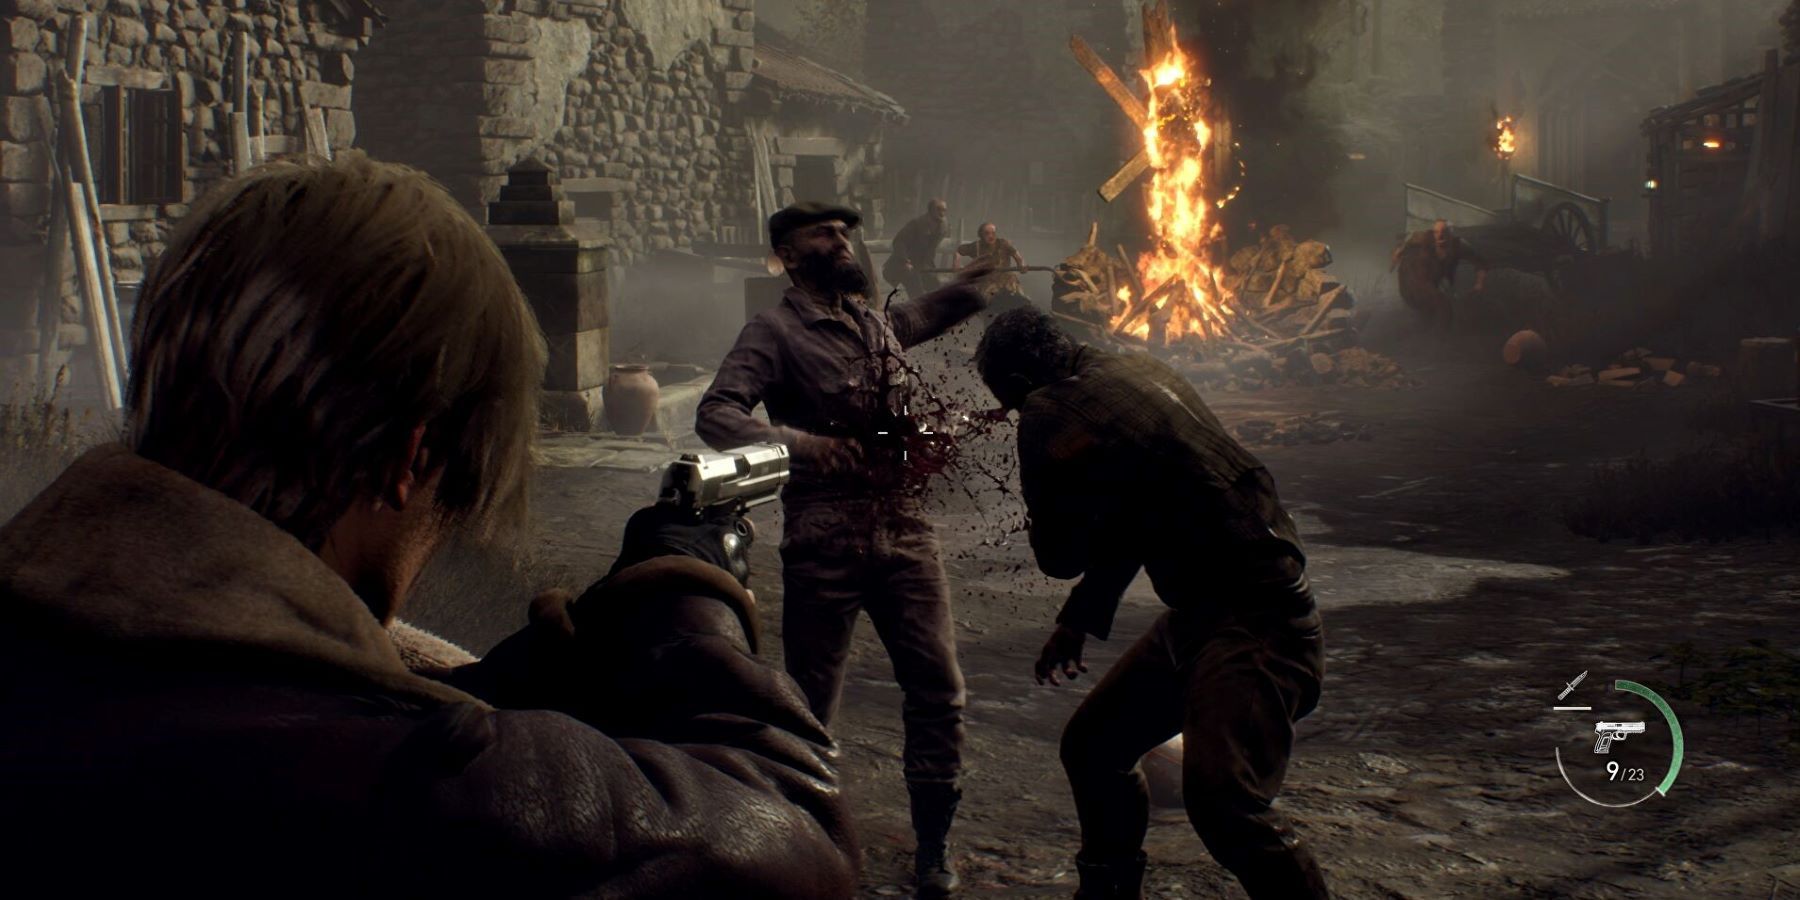 Combat gameplay in the Resident Evil 4 remake